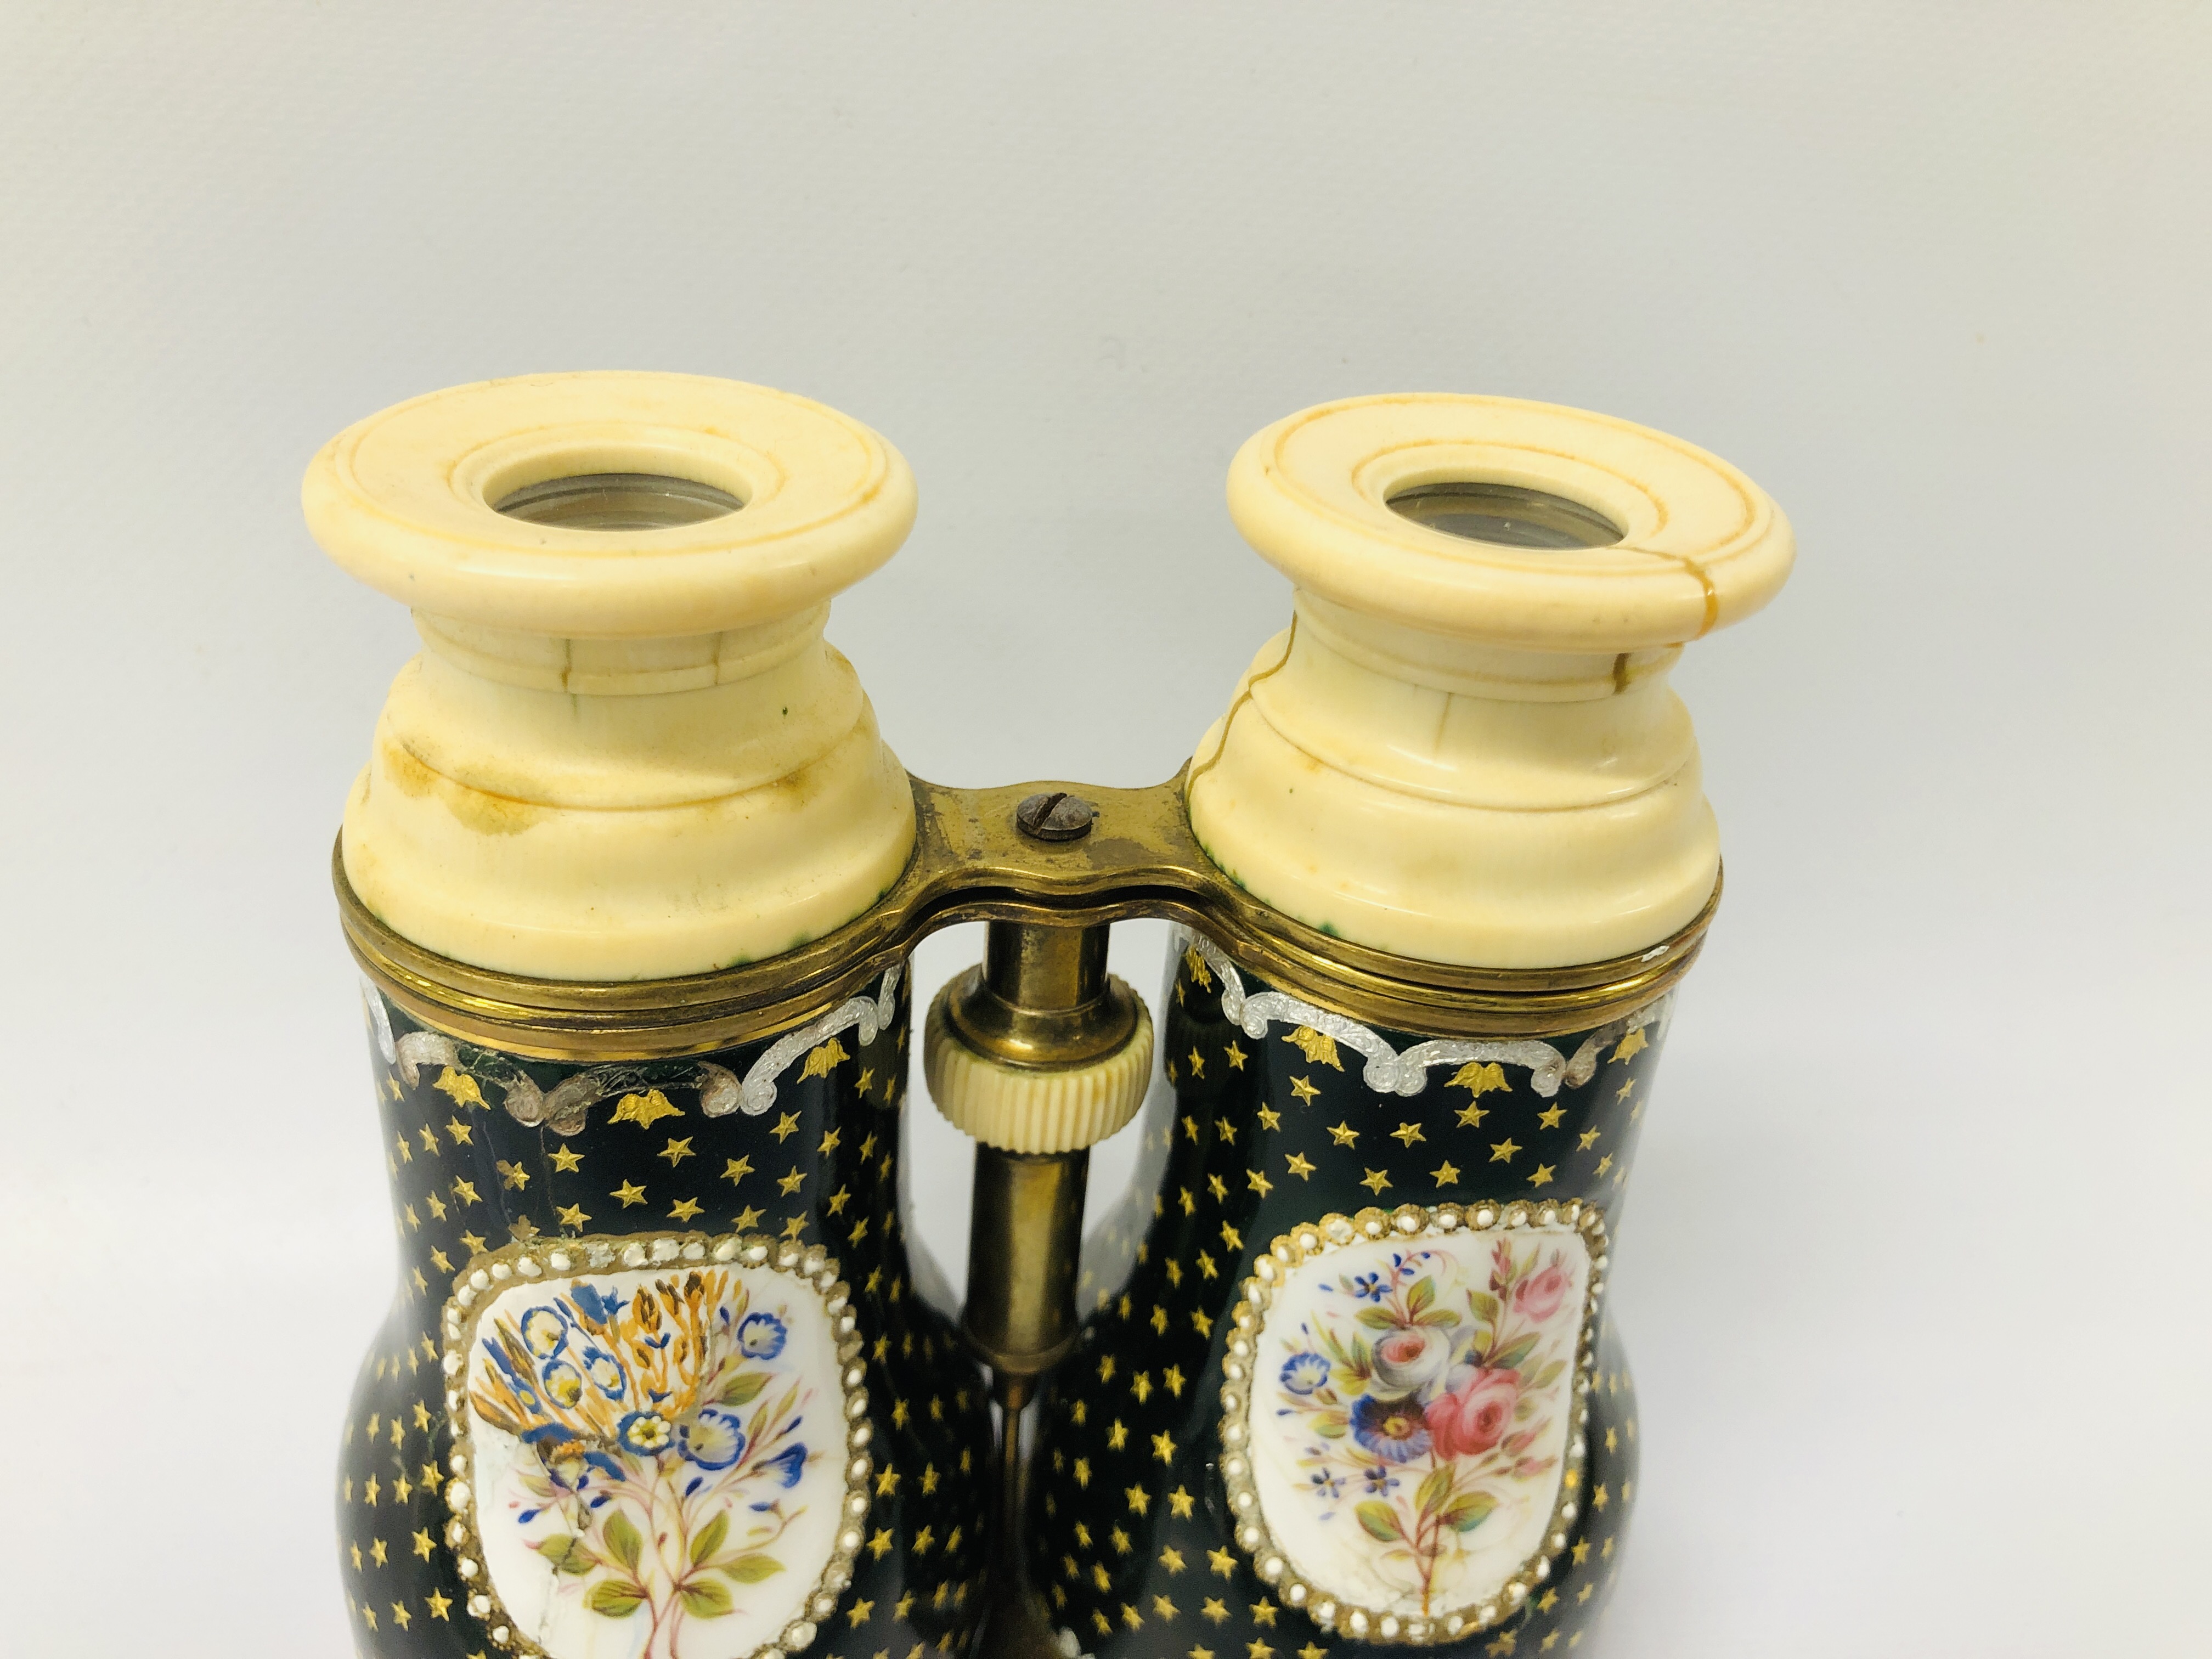 PAIR OF ANTIQUE IVORY AND ENAMEL OPERA GLASSES C1880 - Image 8 of 8